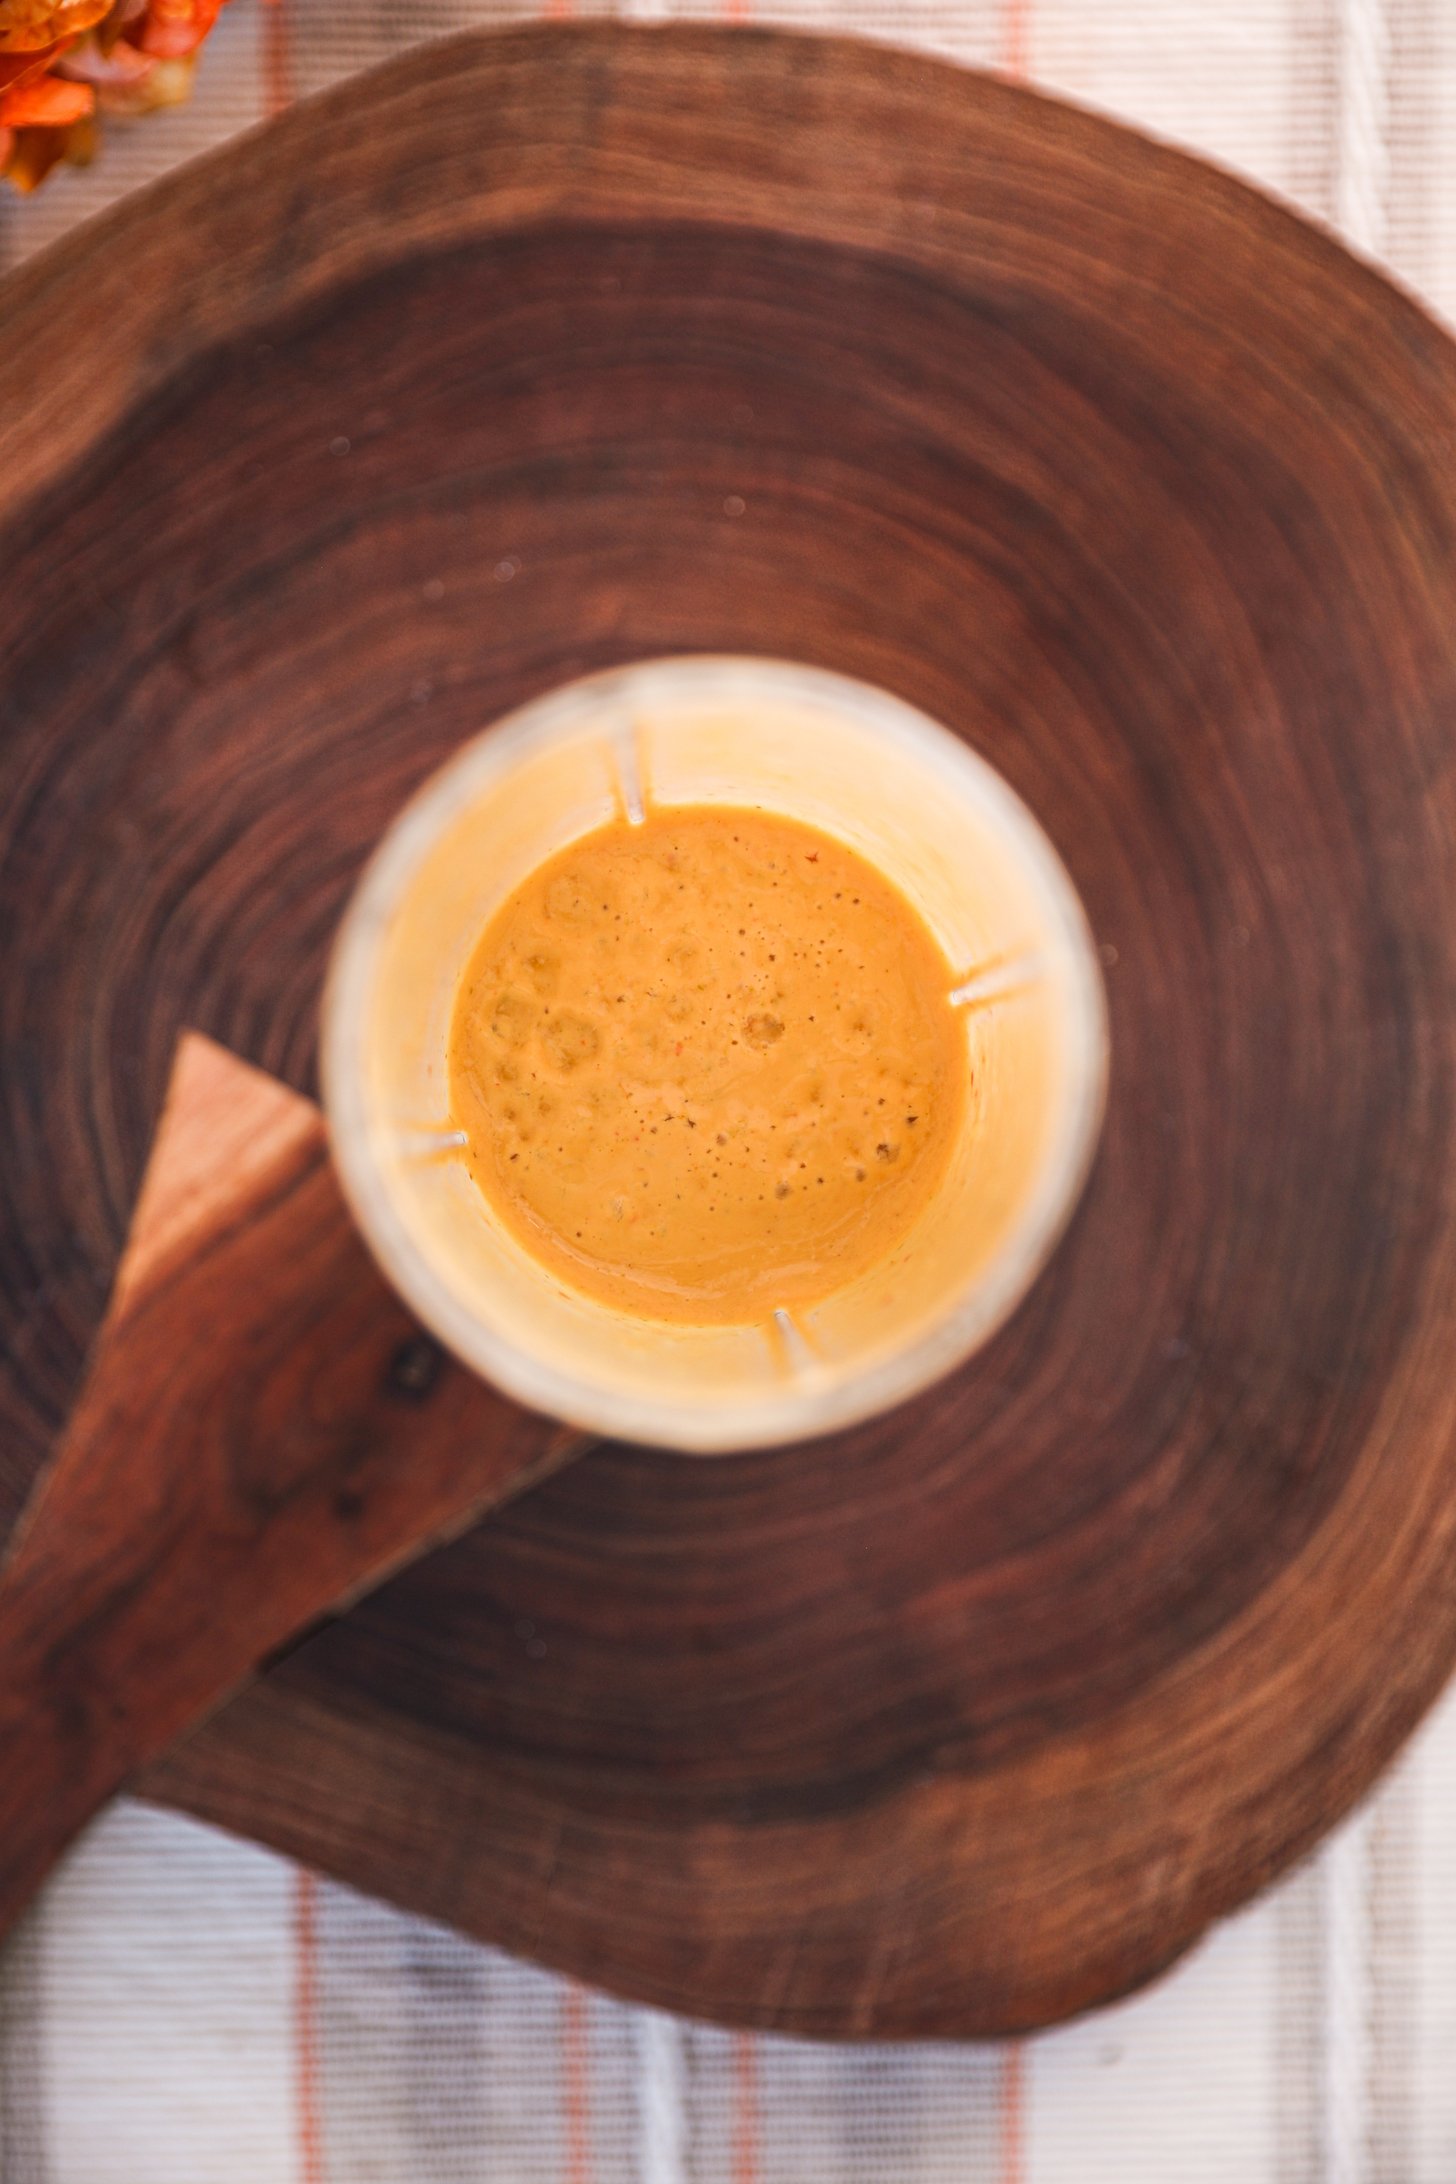 Overhead view of a glass of yellow dressing on a wooden board.